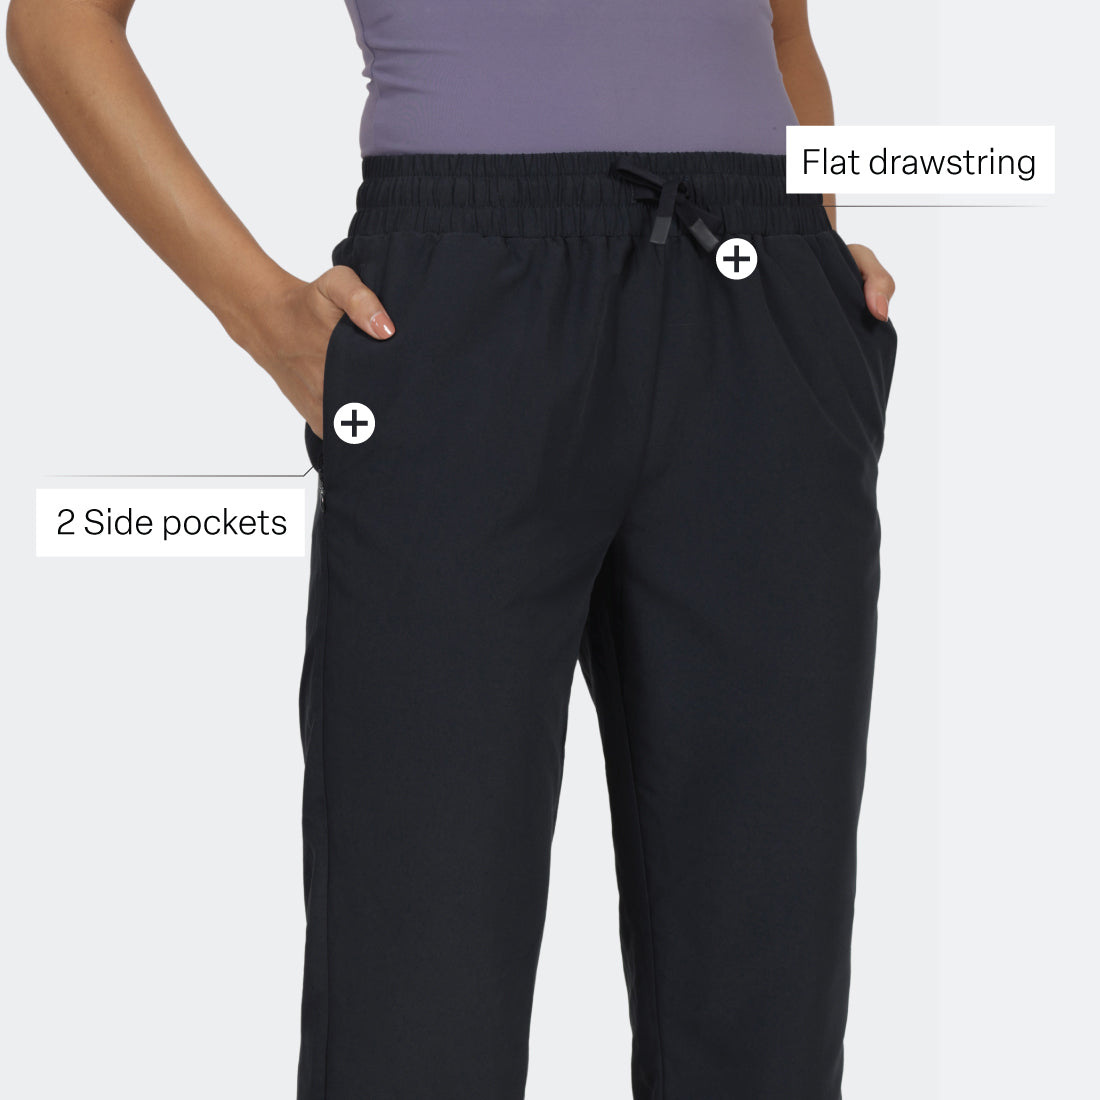 All-Weather Track Pants